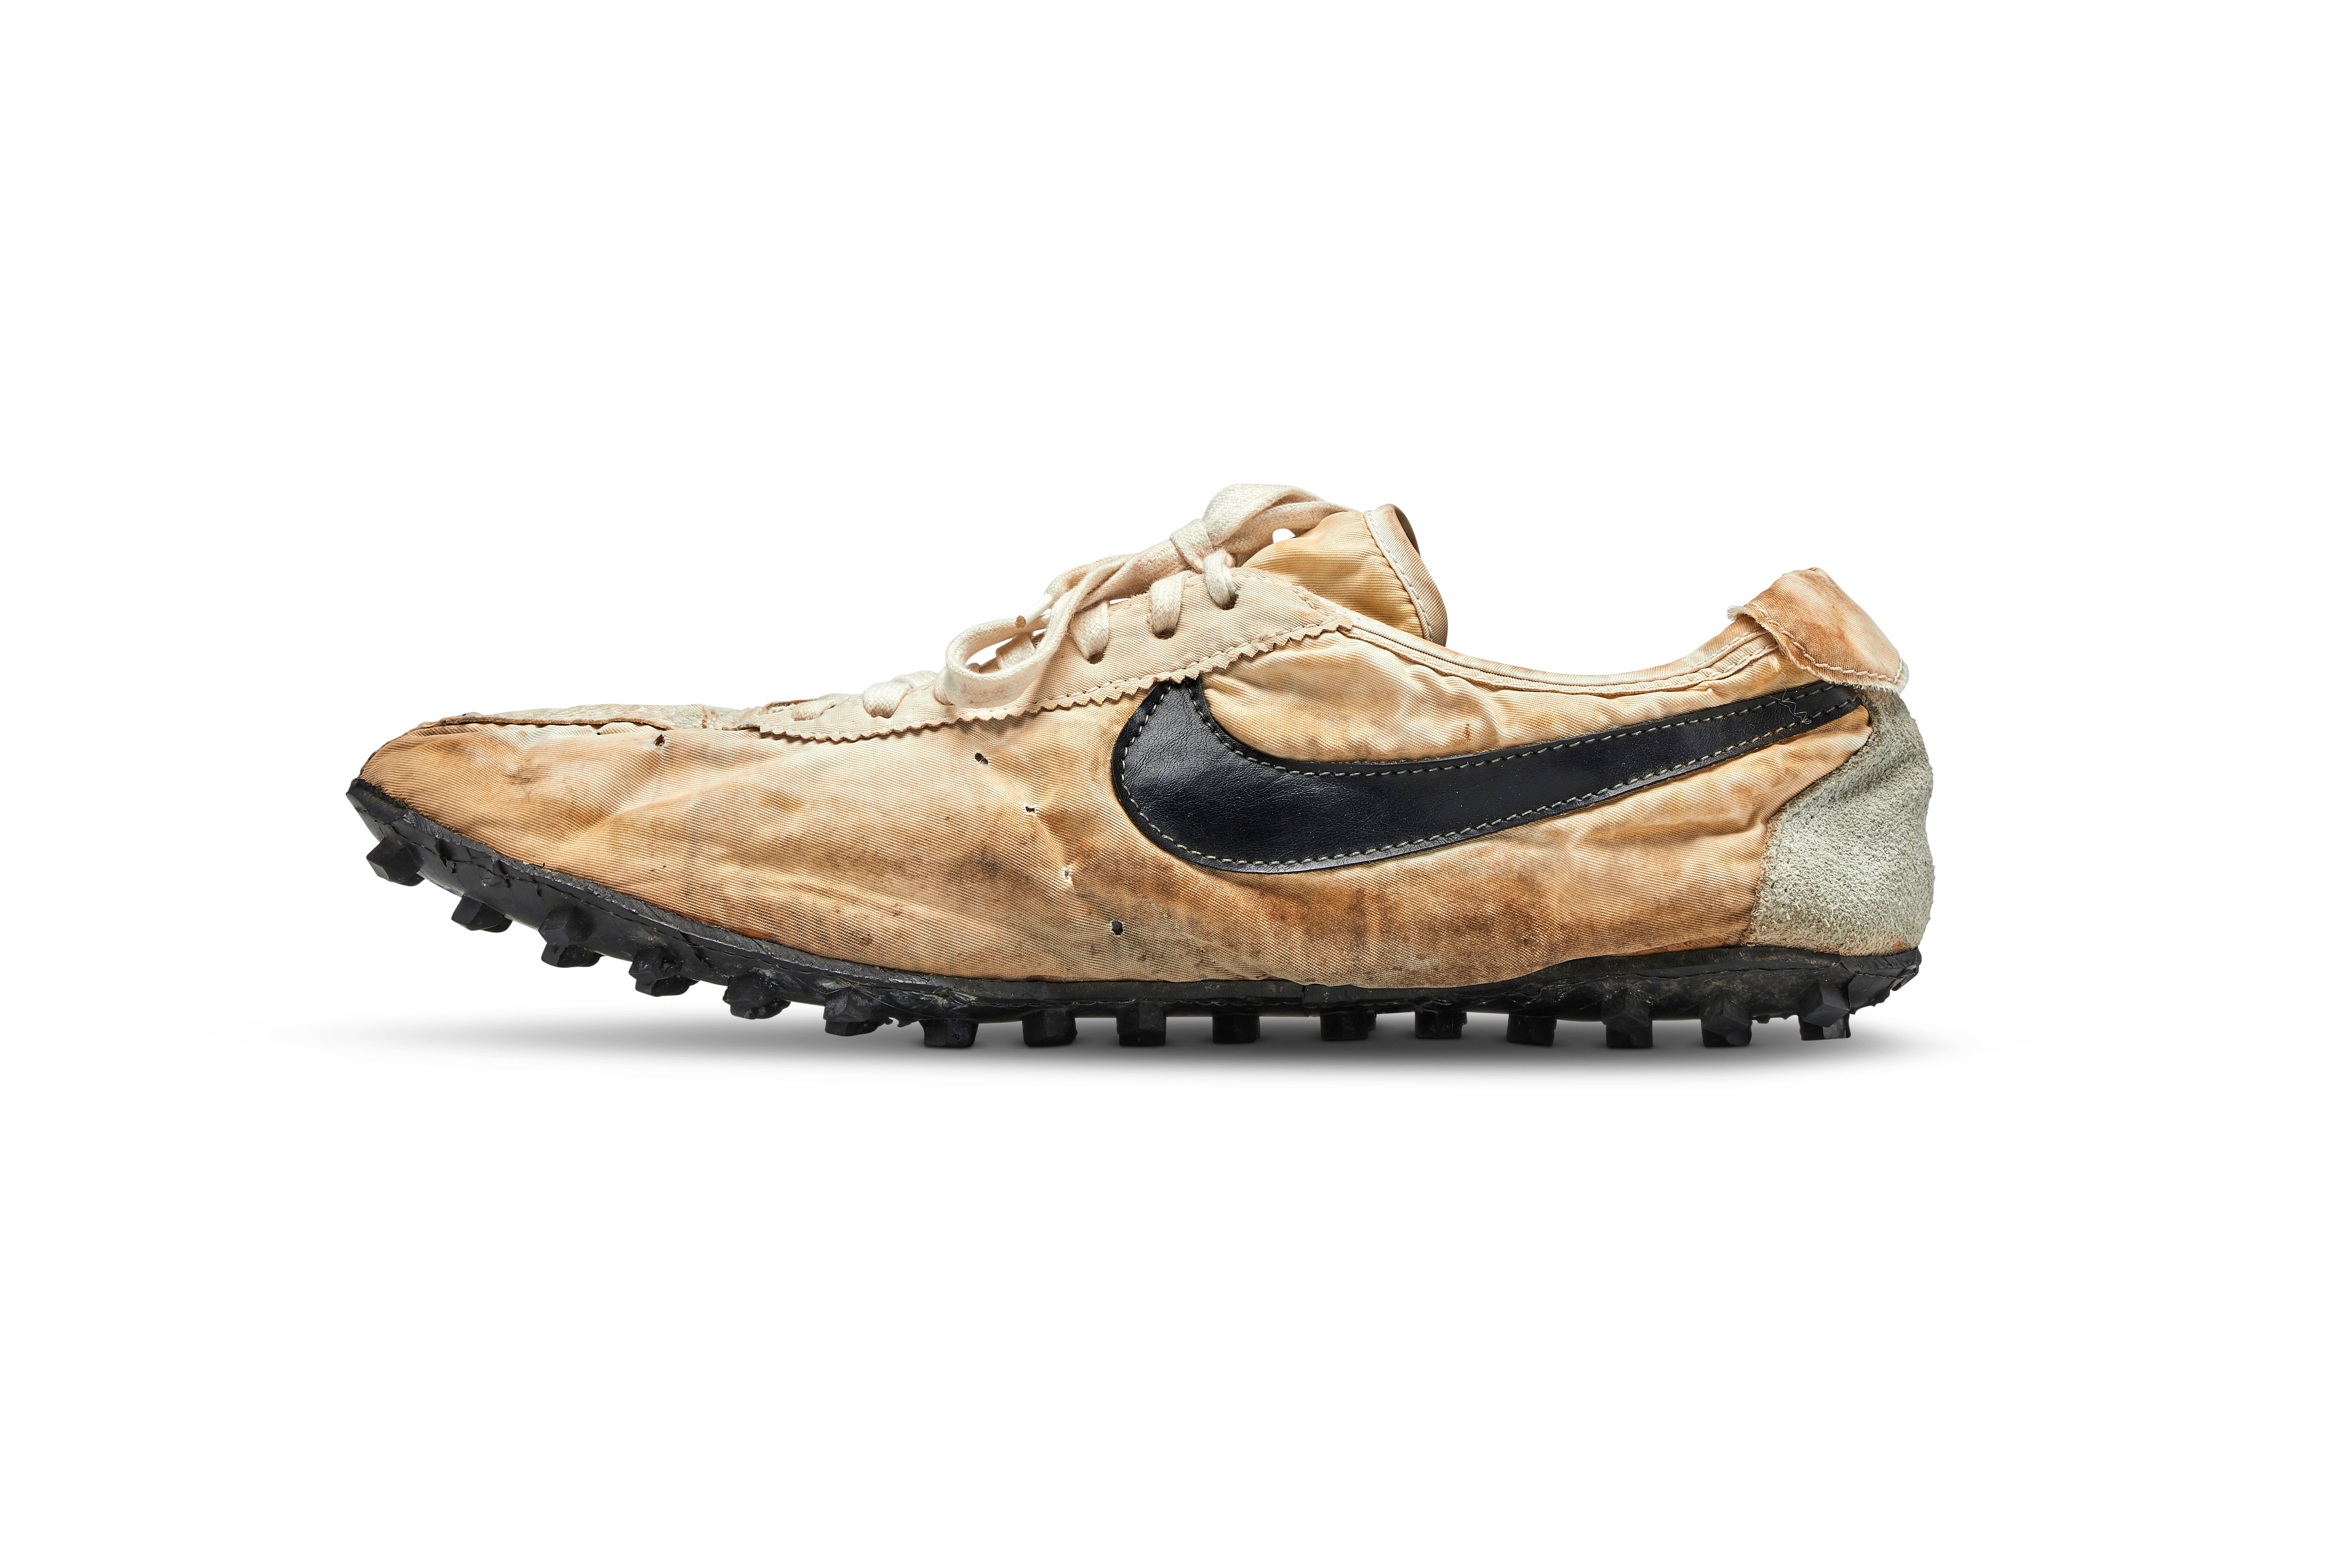 The 1972 Nike 'Moon Shoe' Sells for 